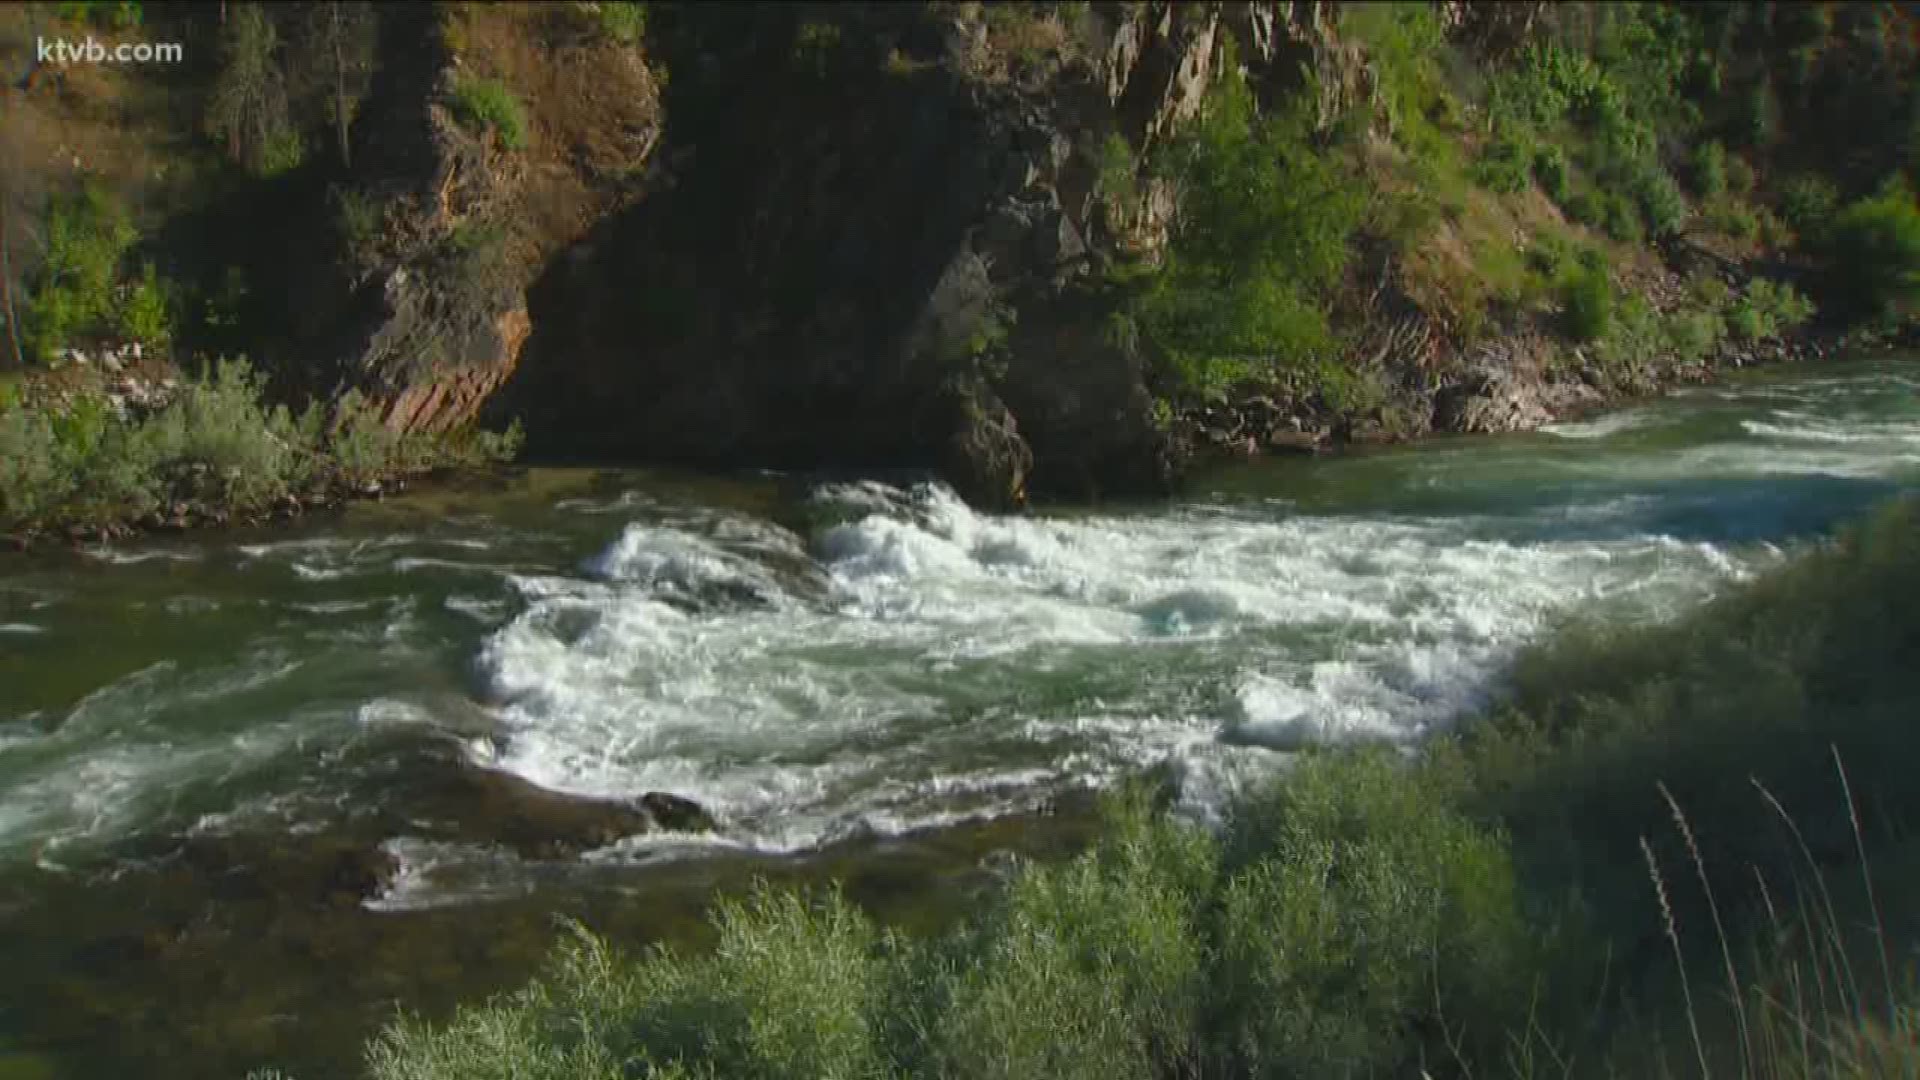 The Boise County Sheriff's Office said three people in a raft went into the water. One of them died.